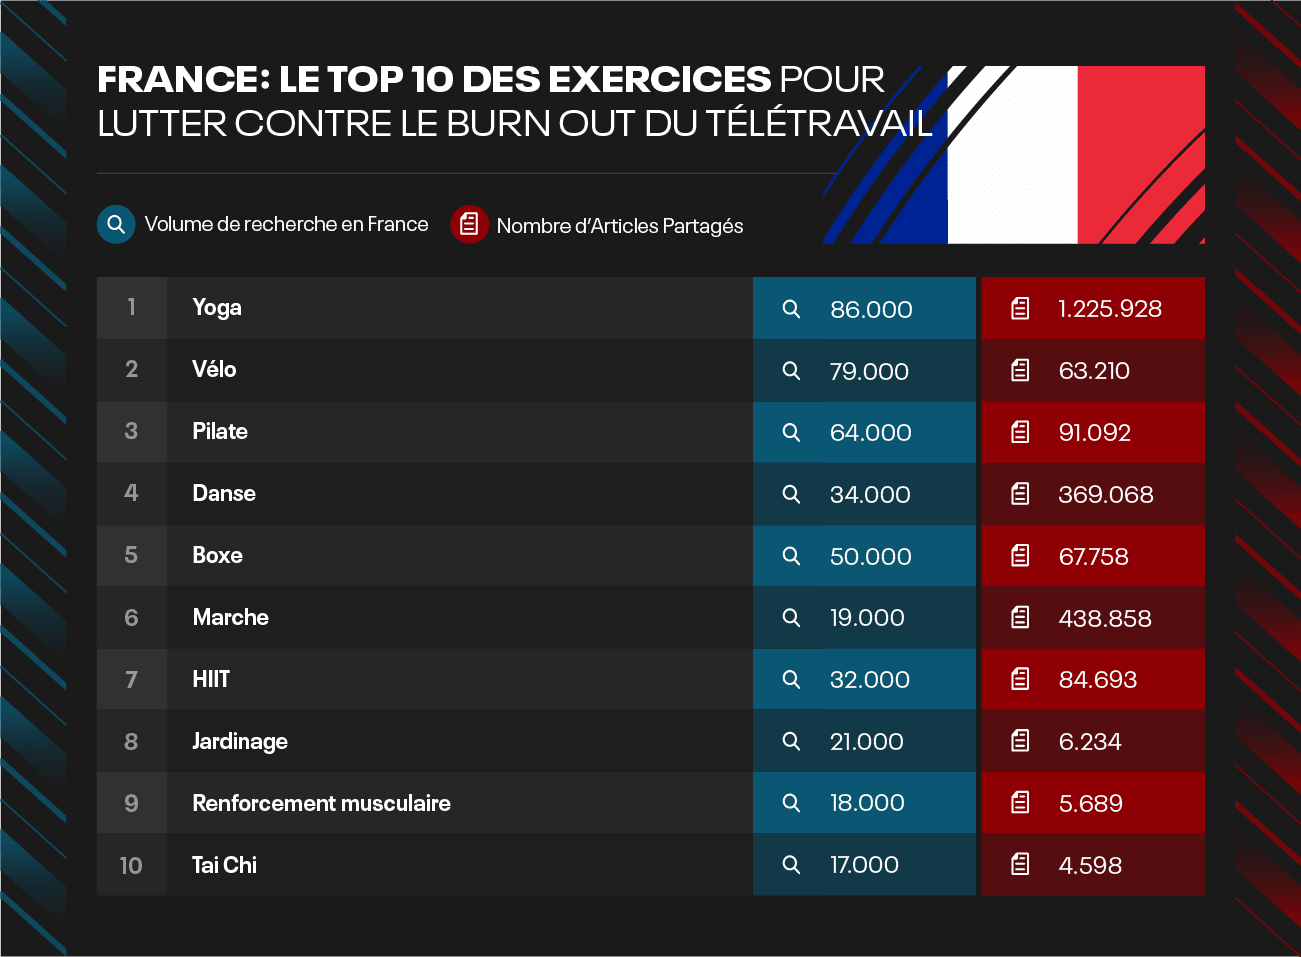 Top 10 exercises in country - FR